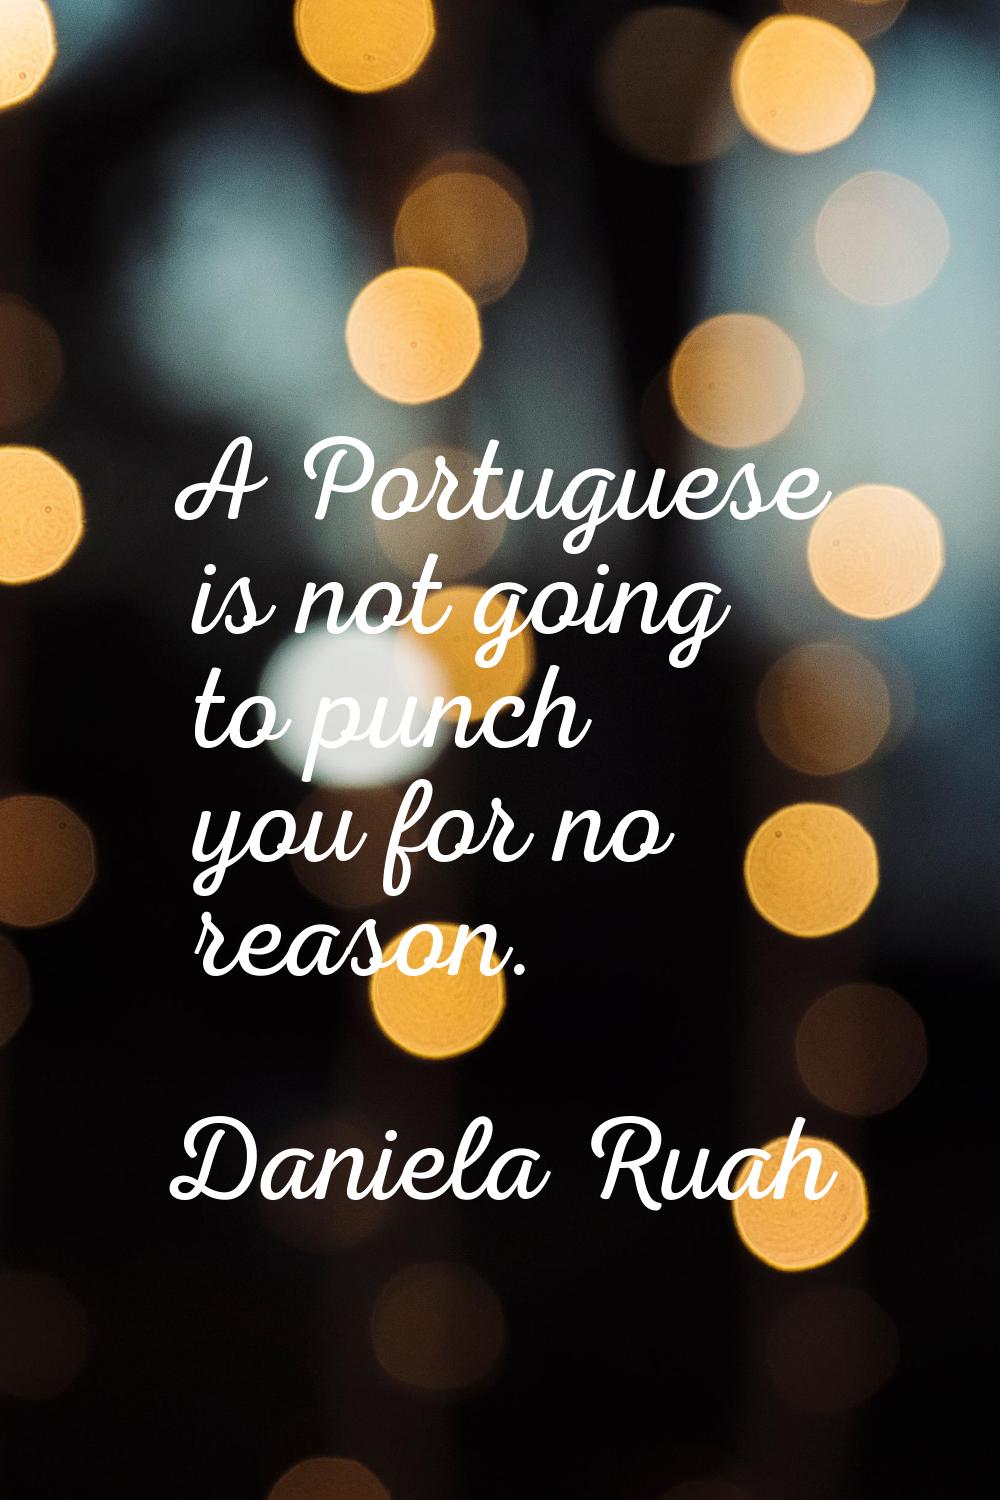 A Portuguese is not going to punch you for no reason.